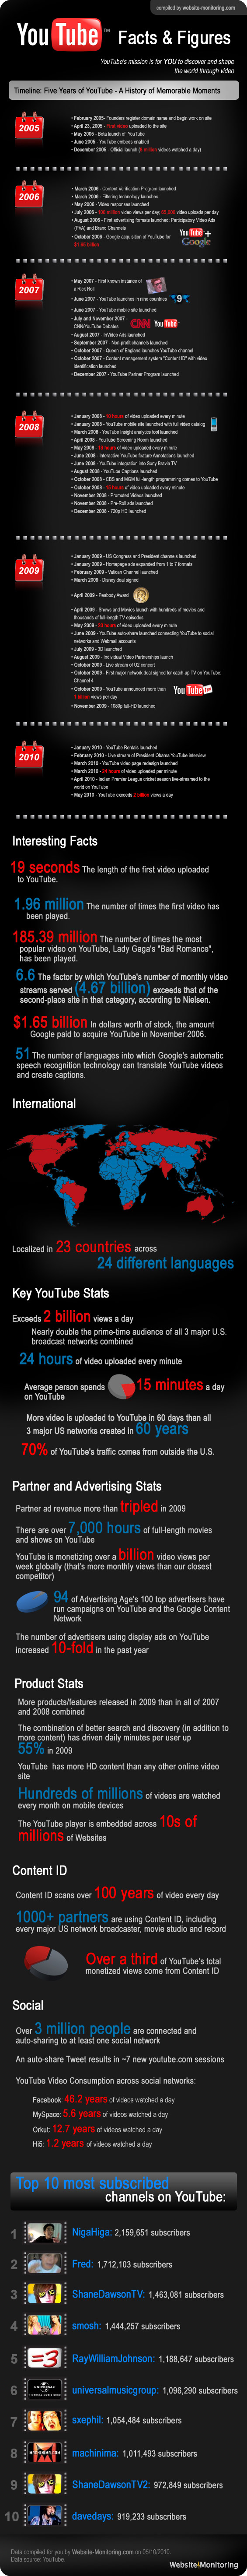 YouTube - monster, fact-bloated infographic unleashed